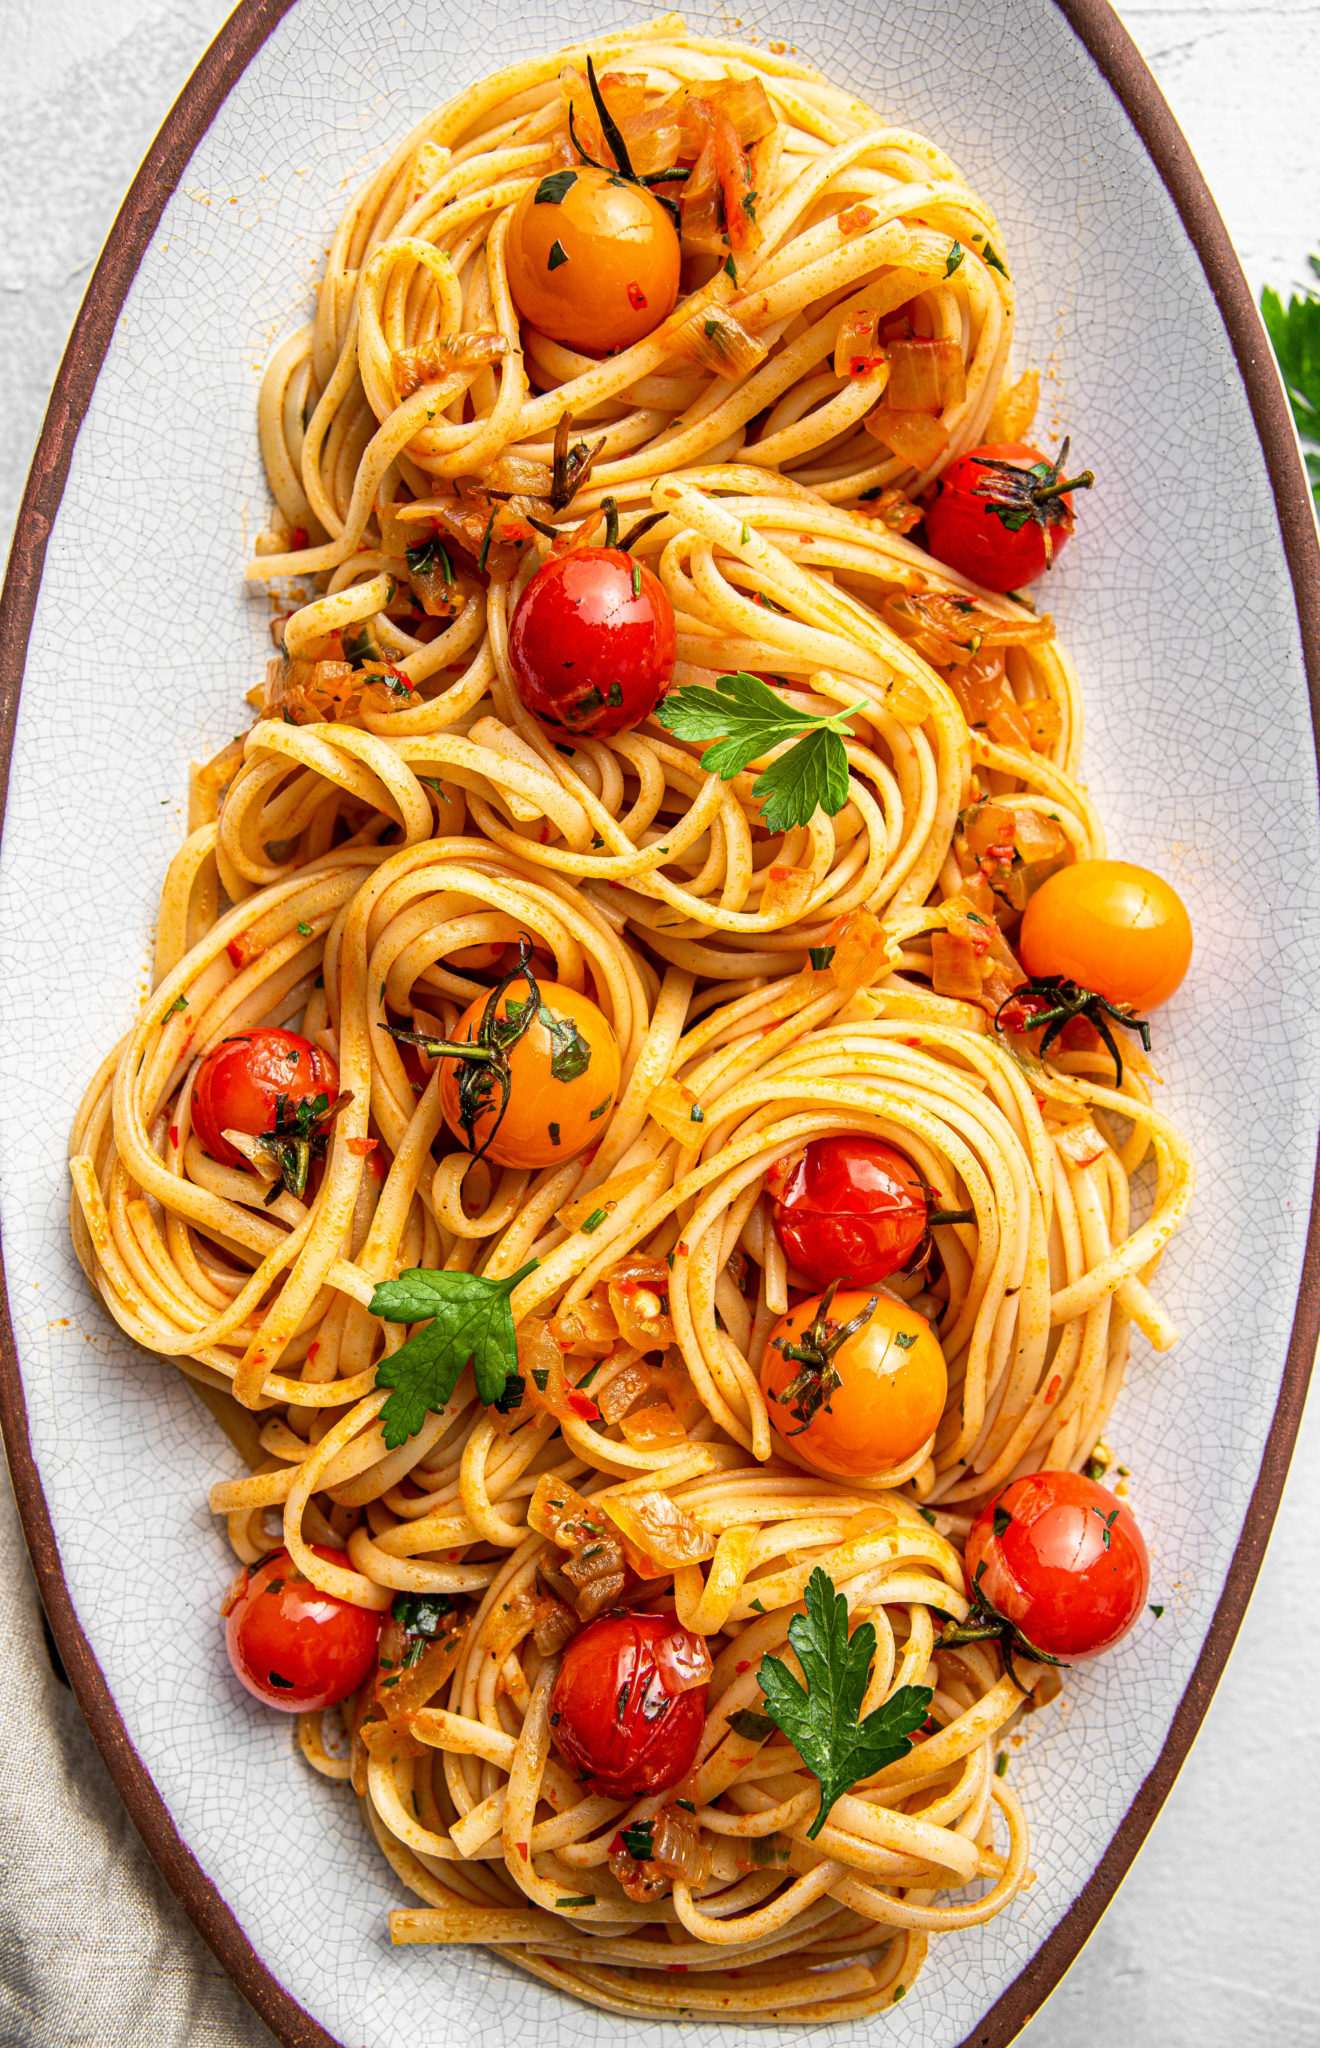 Spicy Pasta with Harissa and Cherry Tomatoes